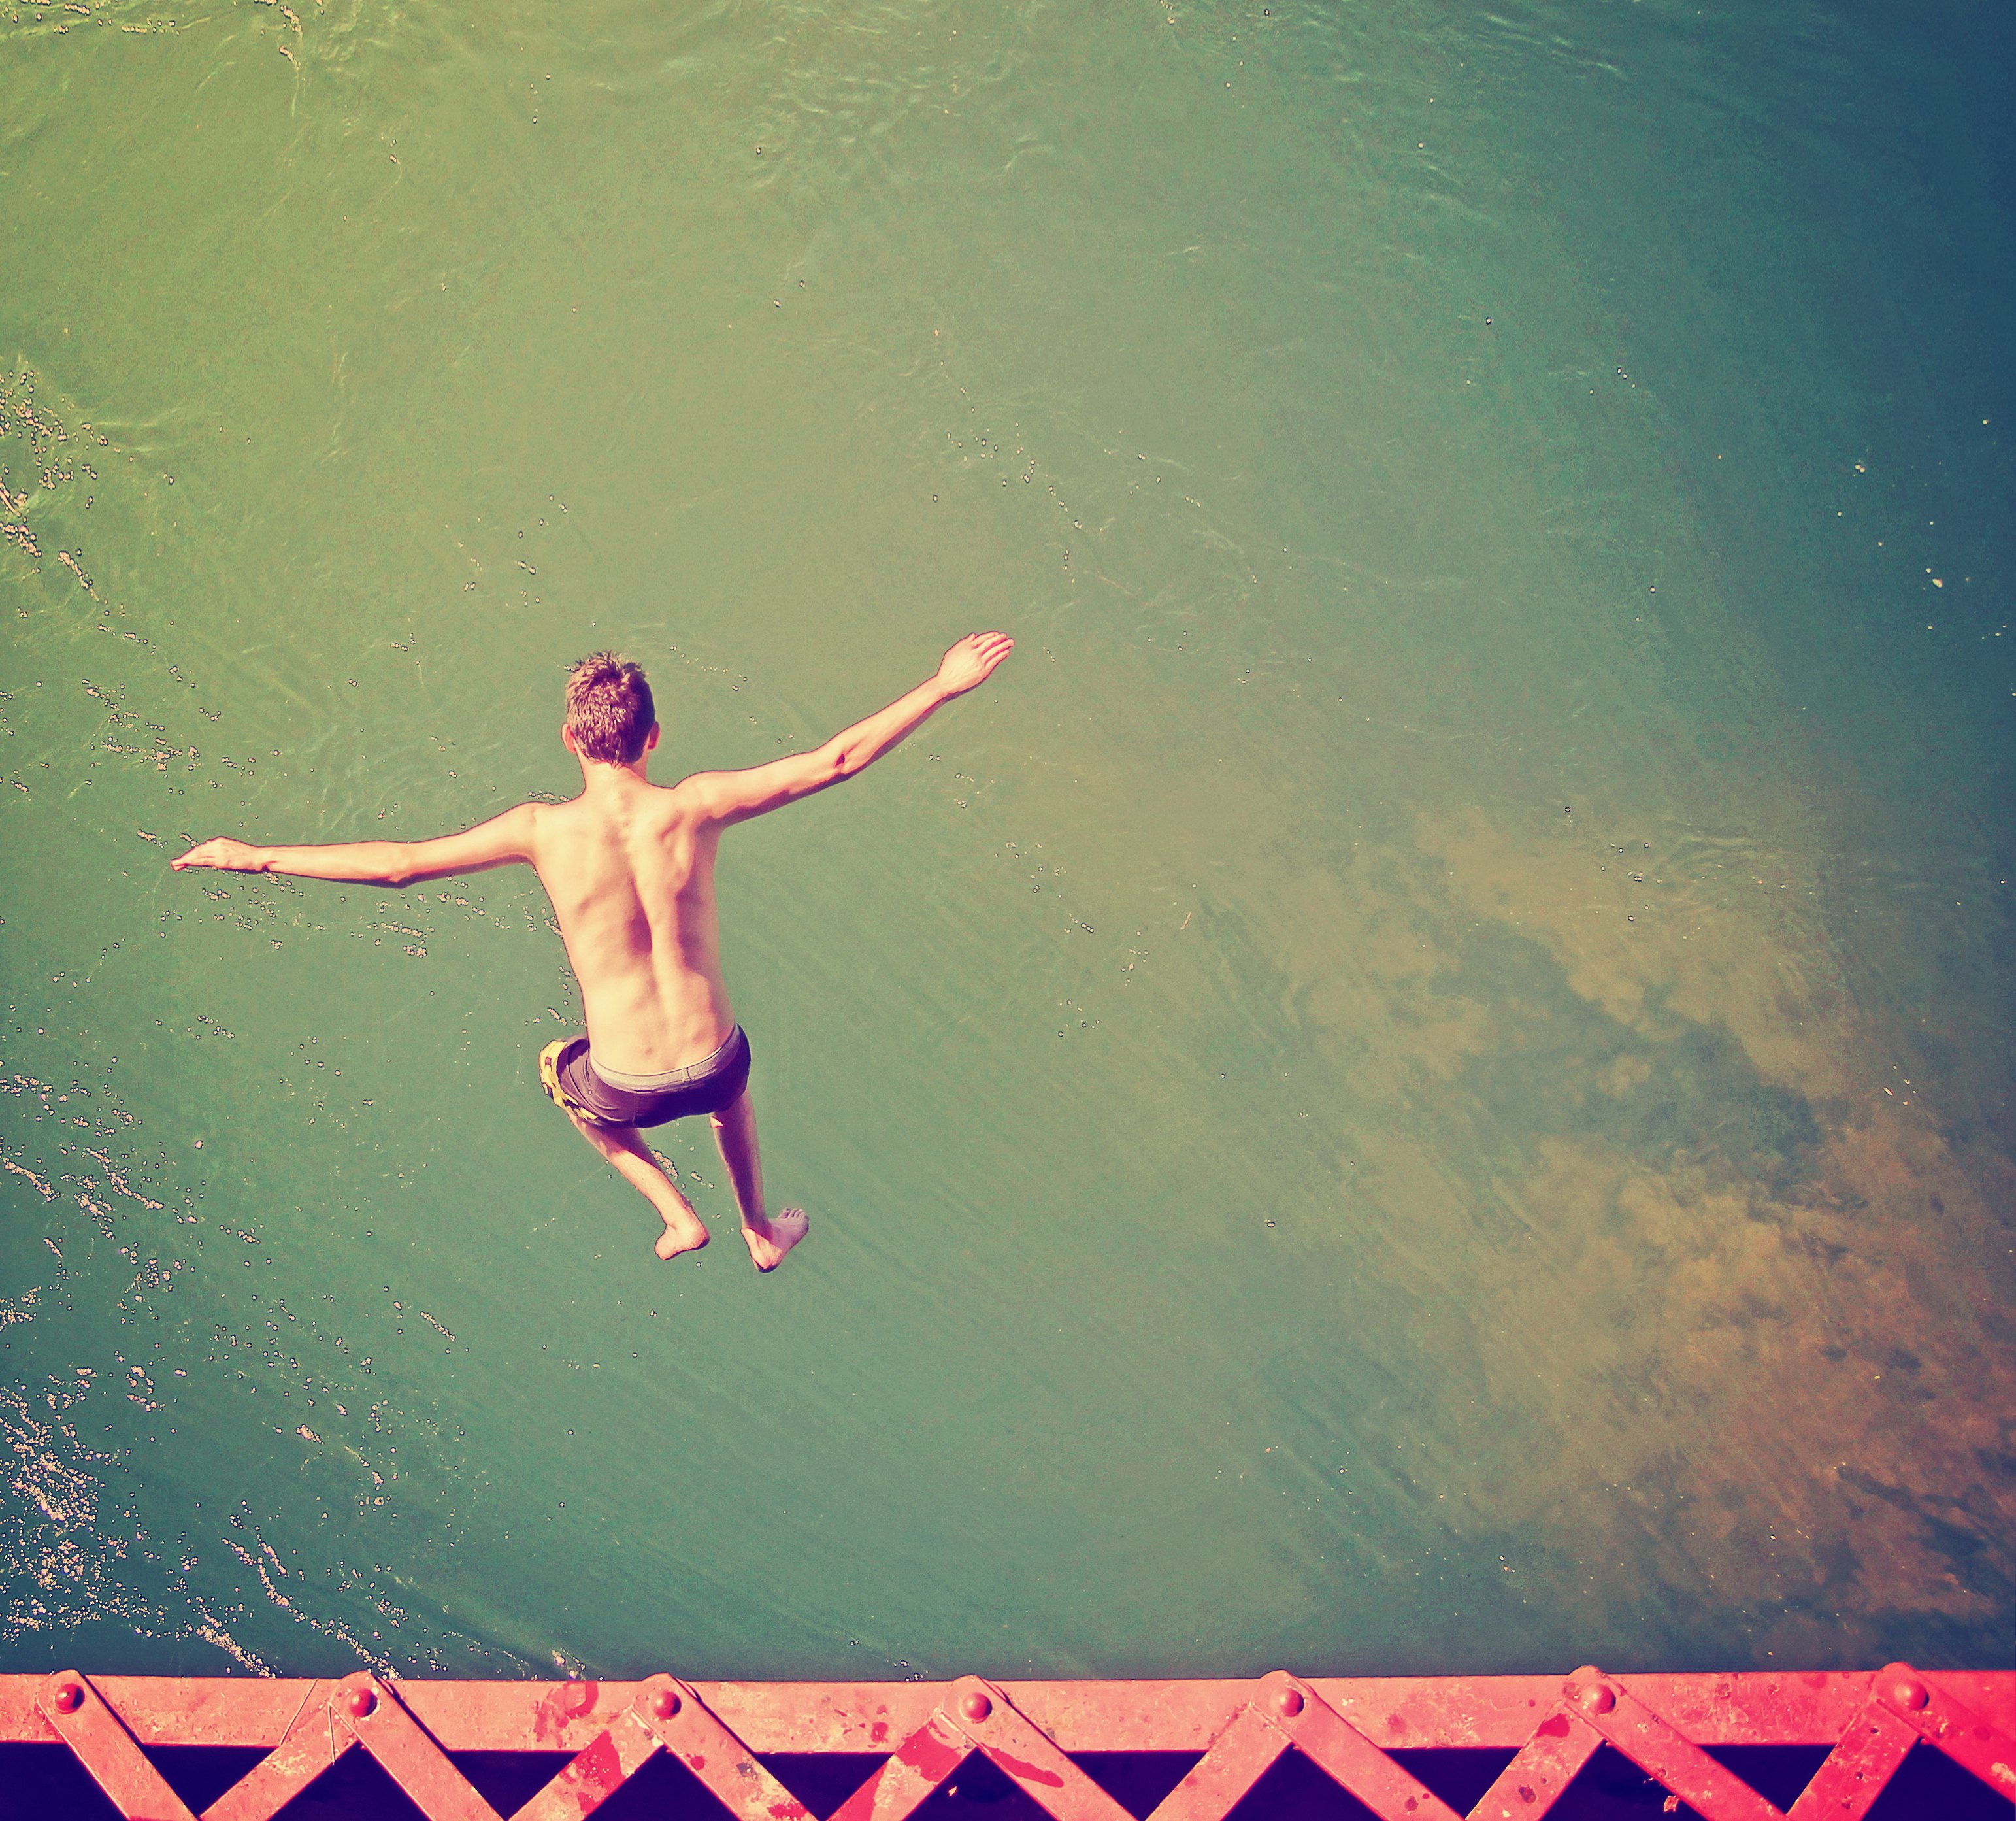 a boy jumping of an old train trestle bridge into a river done